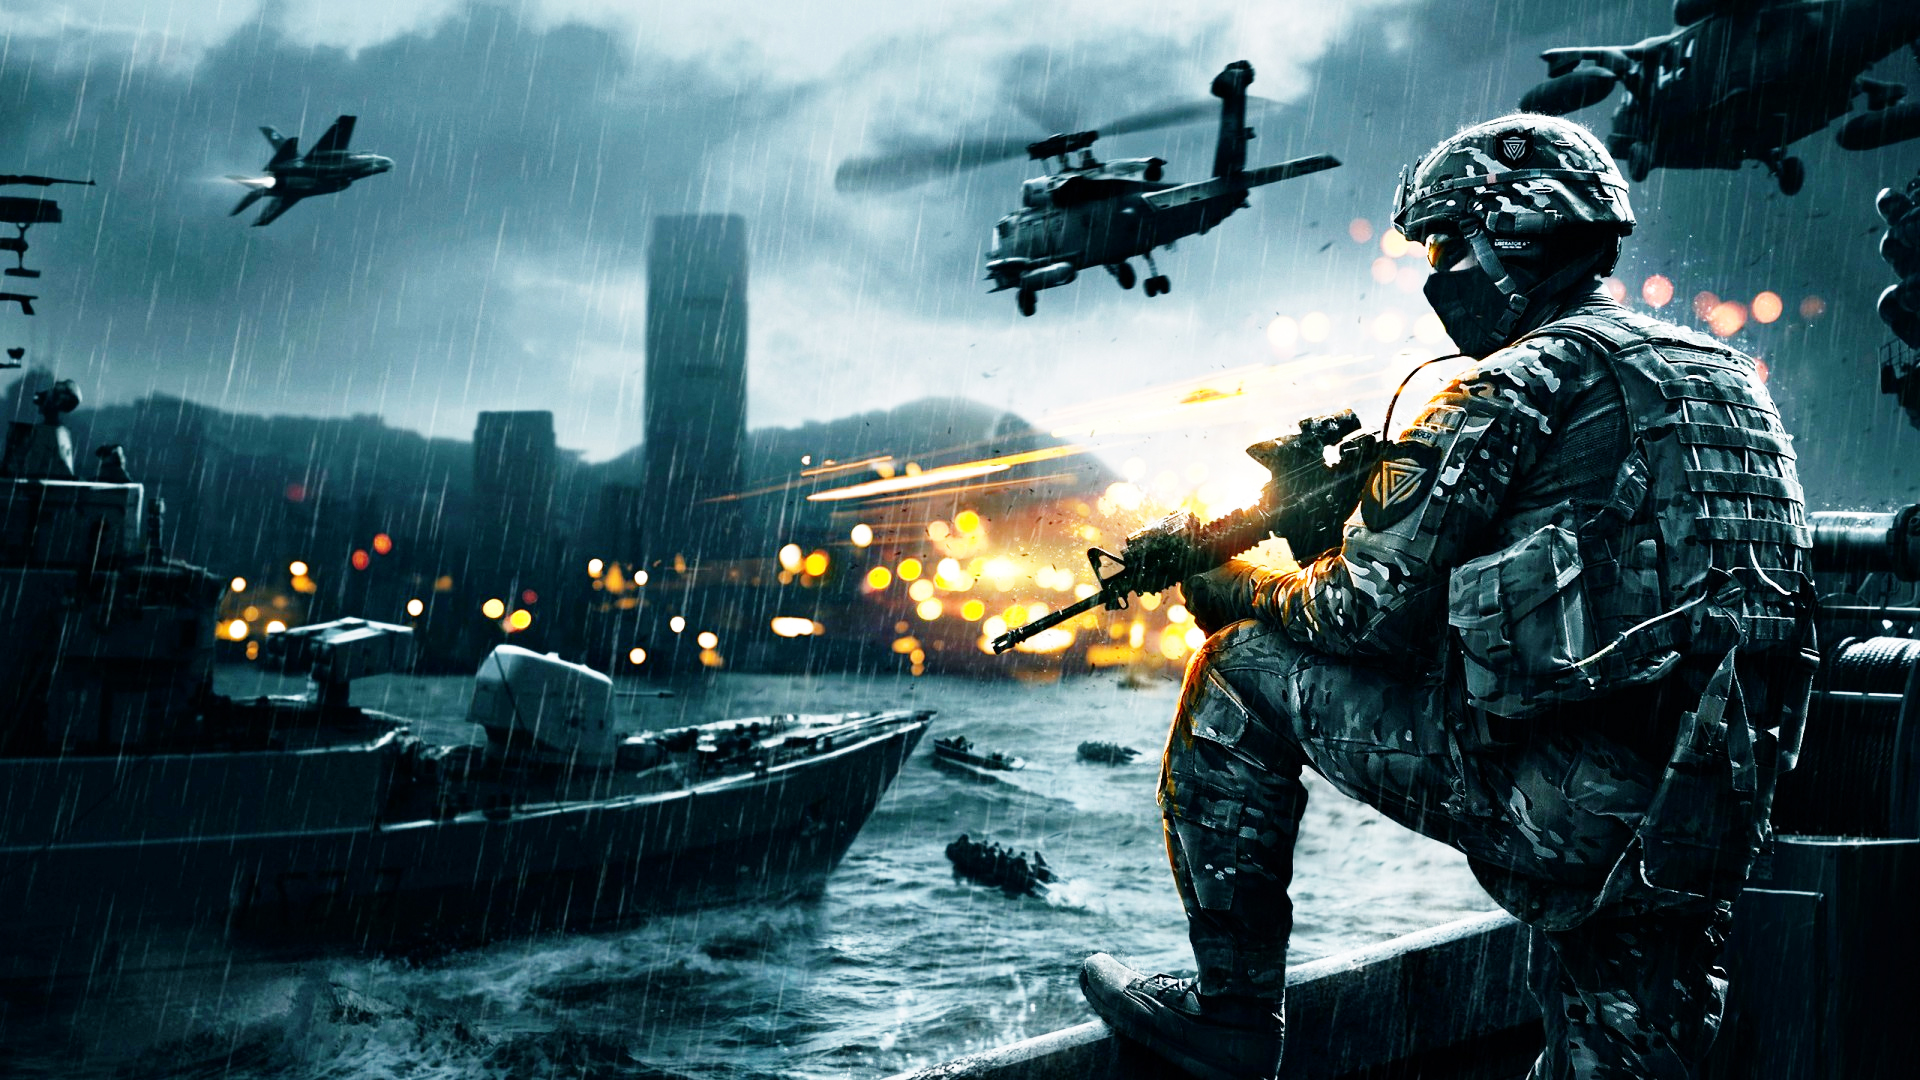 General 1920x1080 Game CG soldier helicopters battle PC gaming video game art video games Electronic Arts Battlefield (game) Battlefield 4 weapon EA DICE vehicle